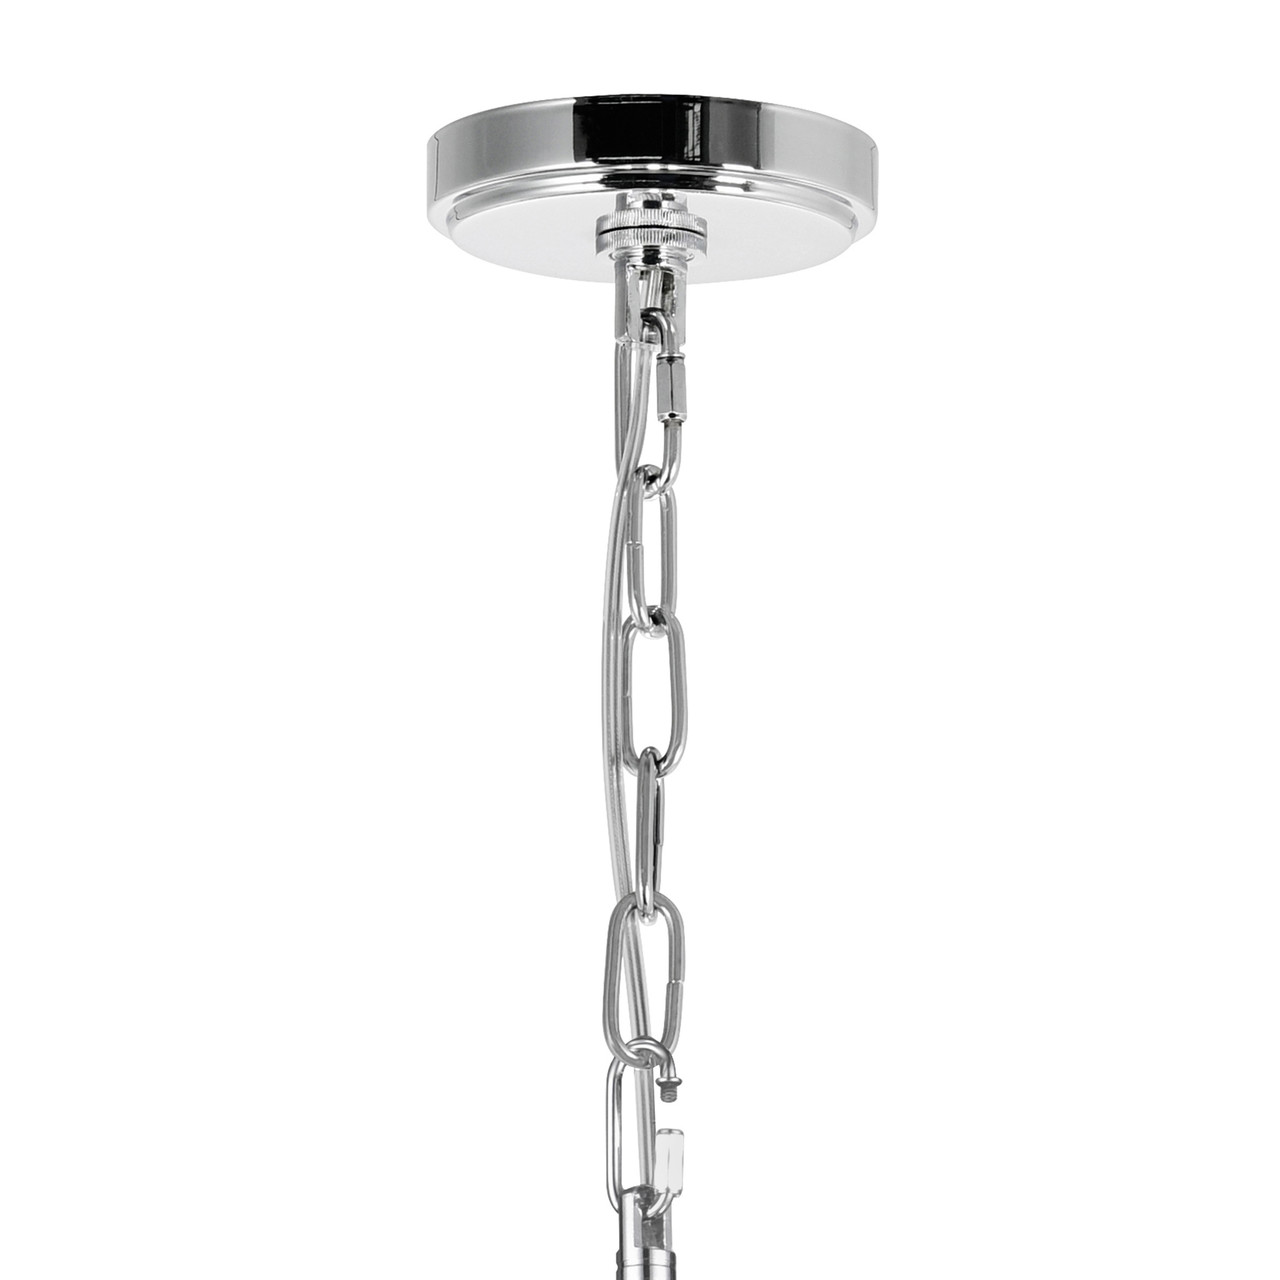 CWI LIGHTING 9957P20-4-601 4 Light  Chandelier with Chrome finish